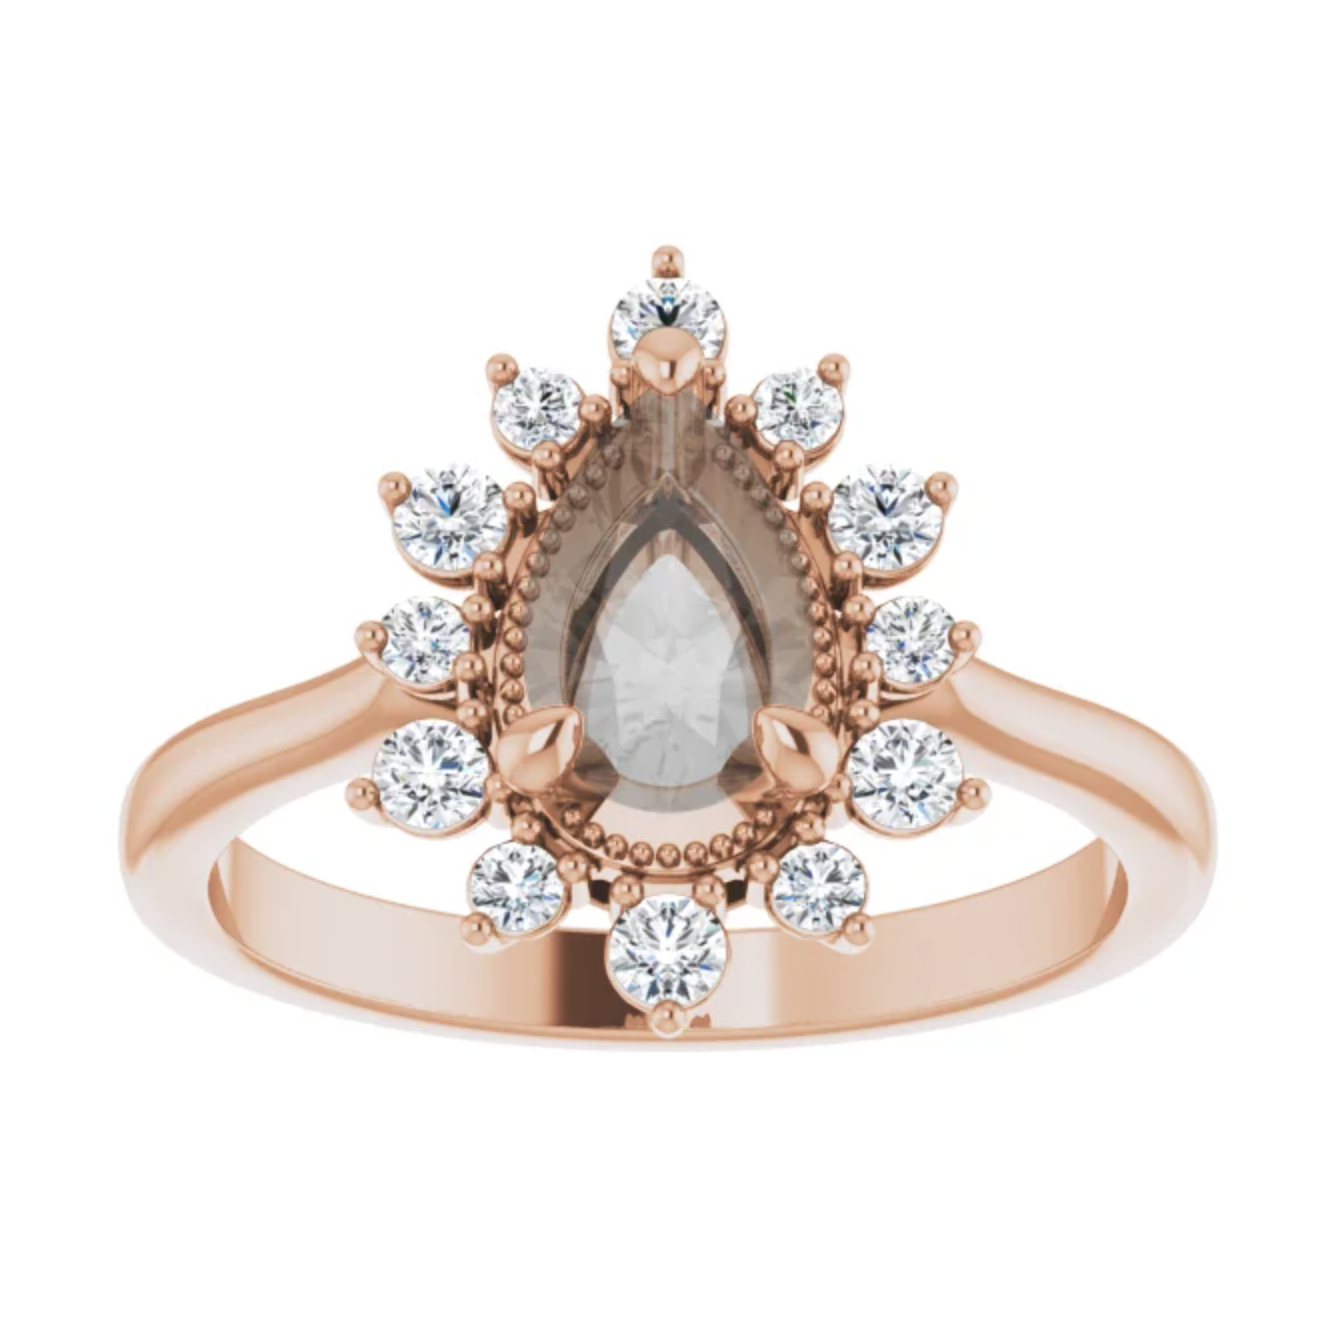 Lucy Setting - Midwinter Co. Alternative Bridal Rings and Modern Fine Jewelry